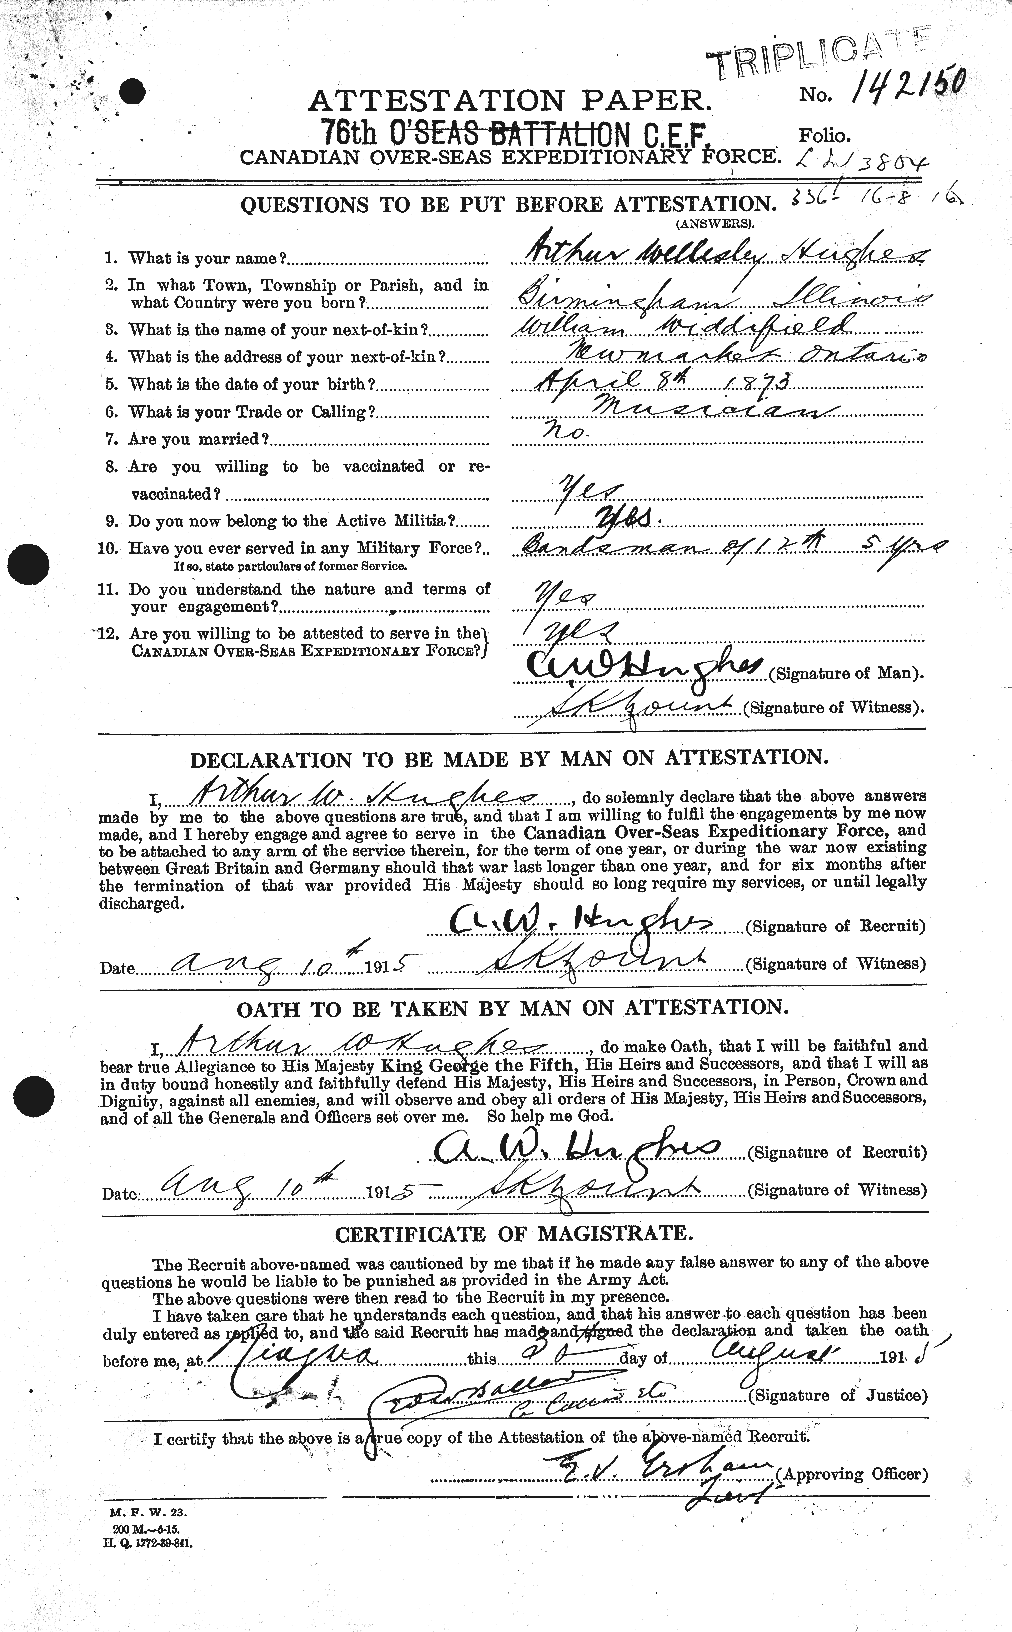 Personnel Records of the First World War - CEF 402573a